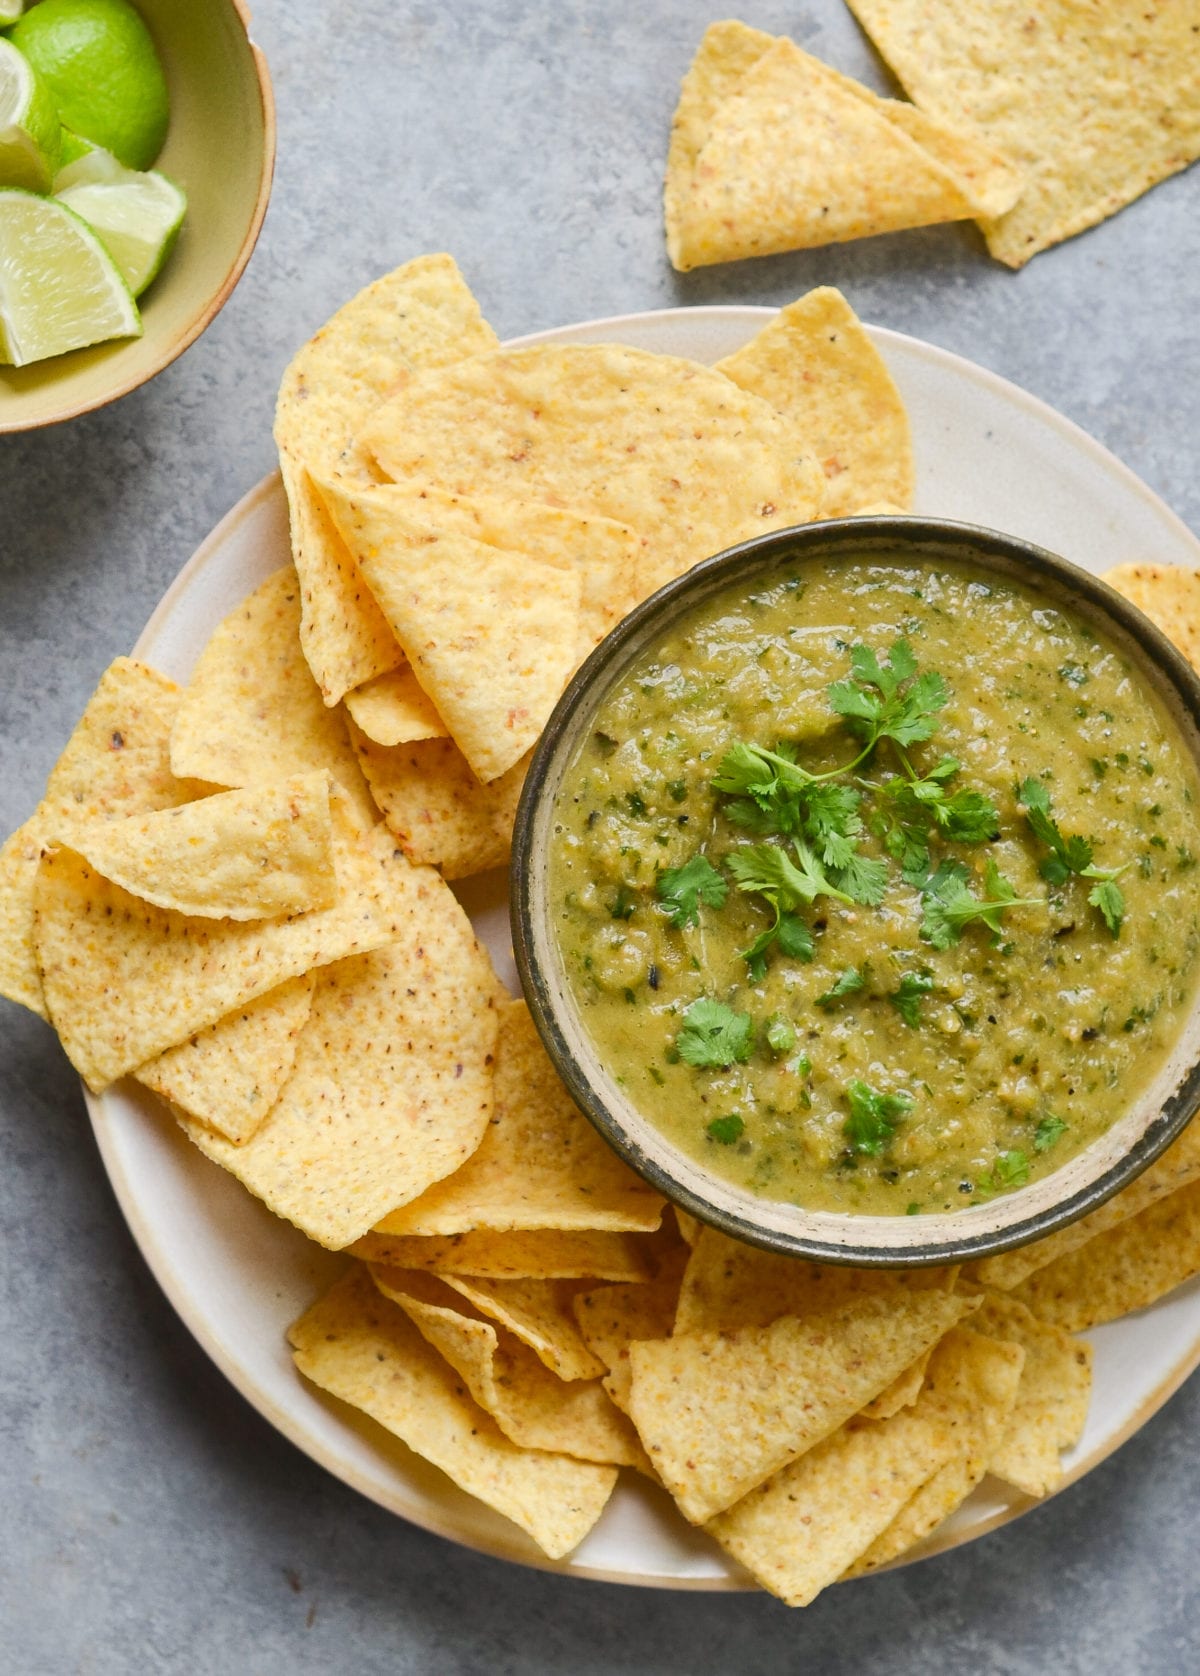 Bowl of salsa verde on a plate with tortilla chips.